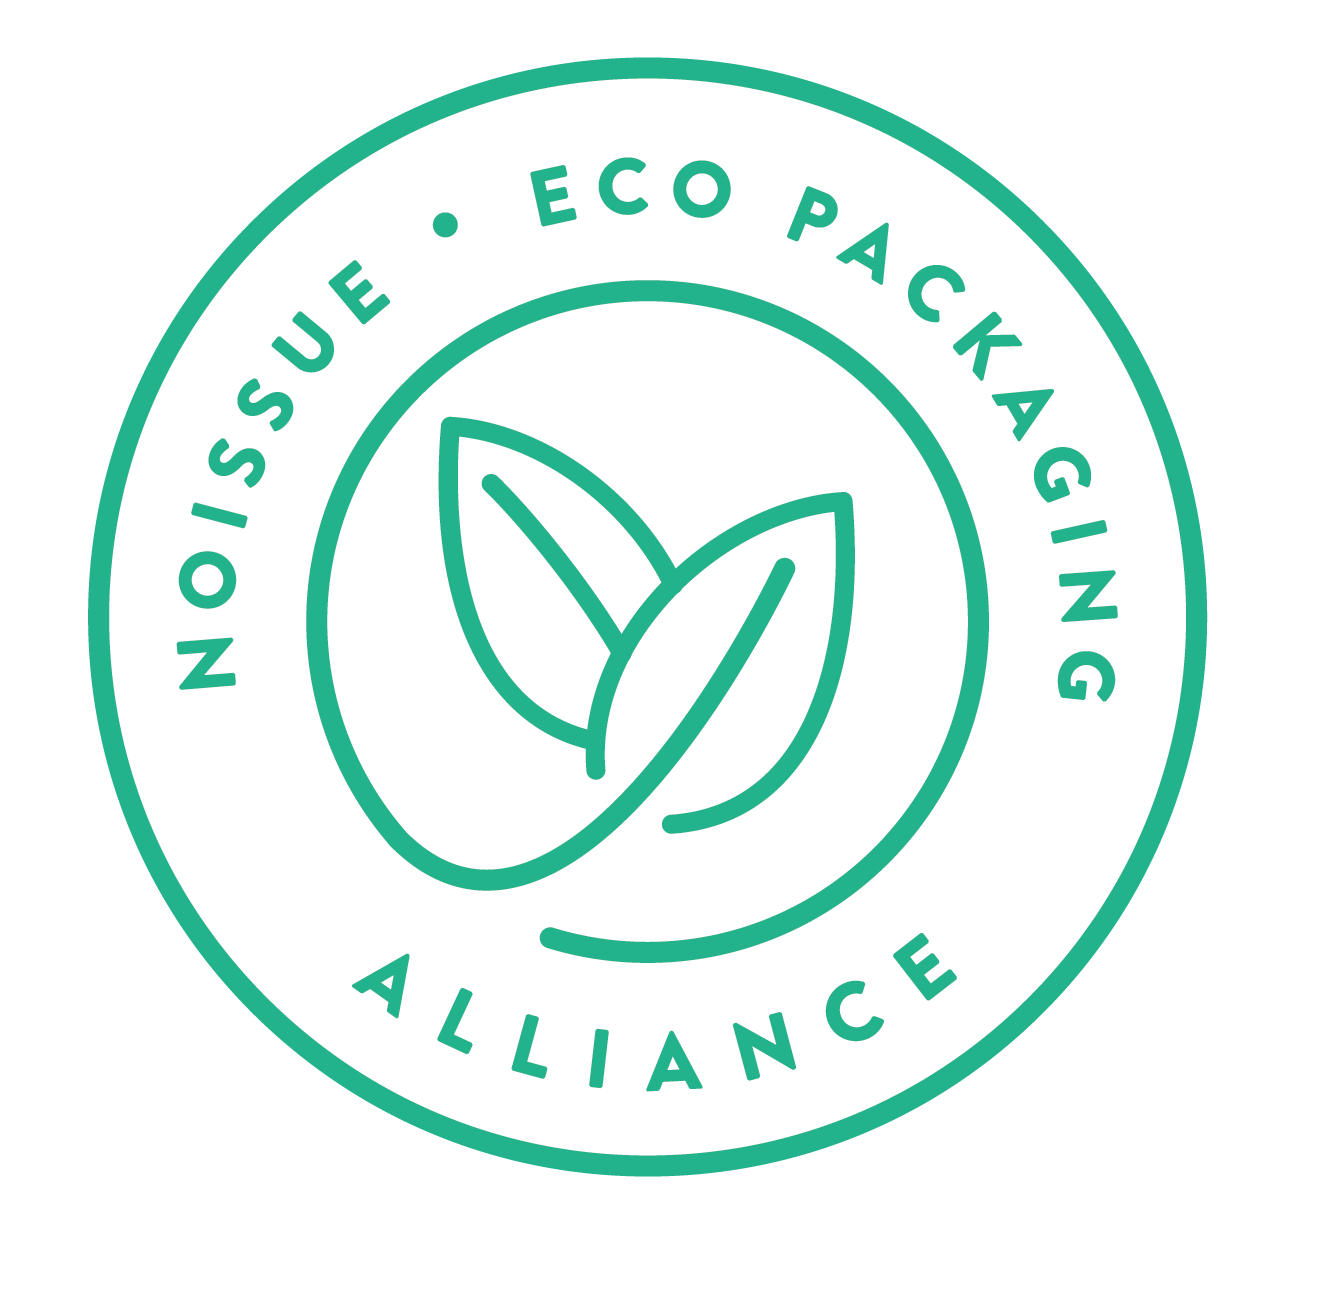 No Issue Eco Alliance